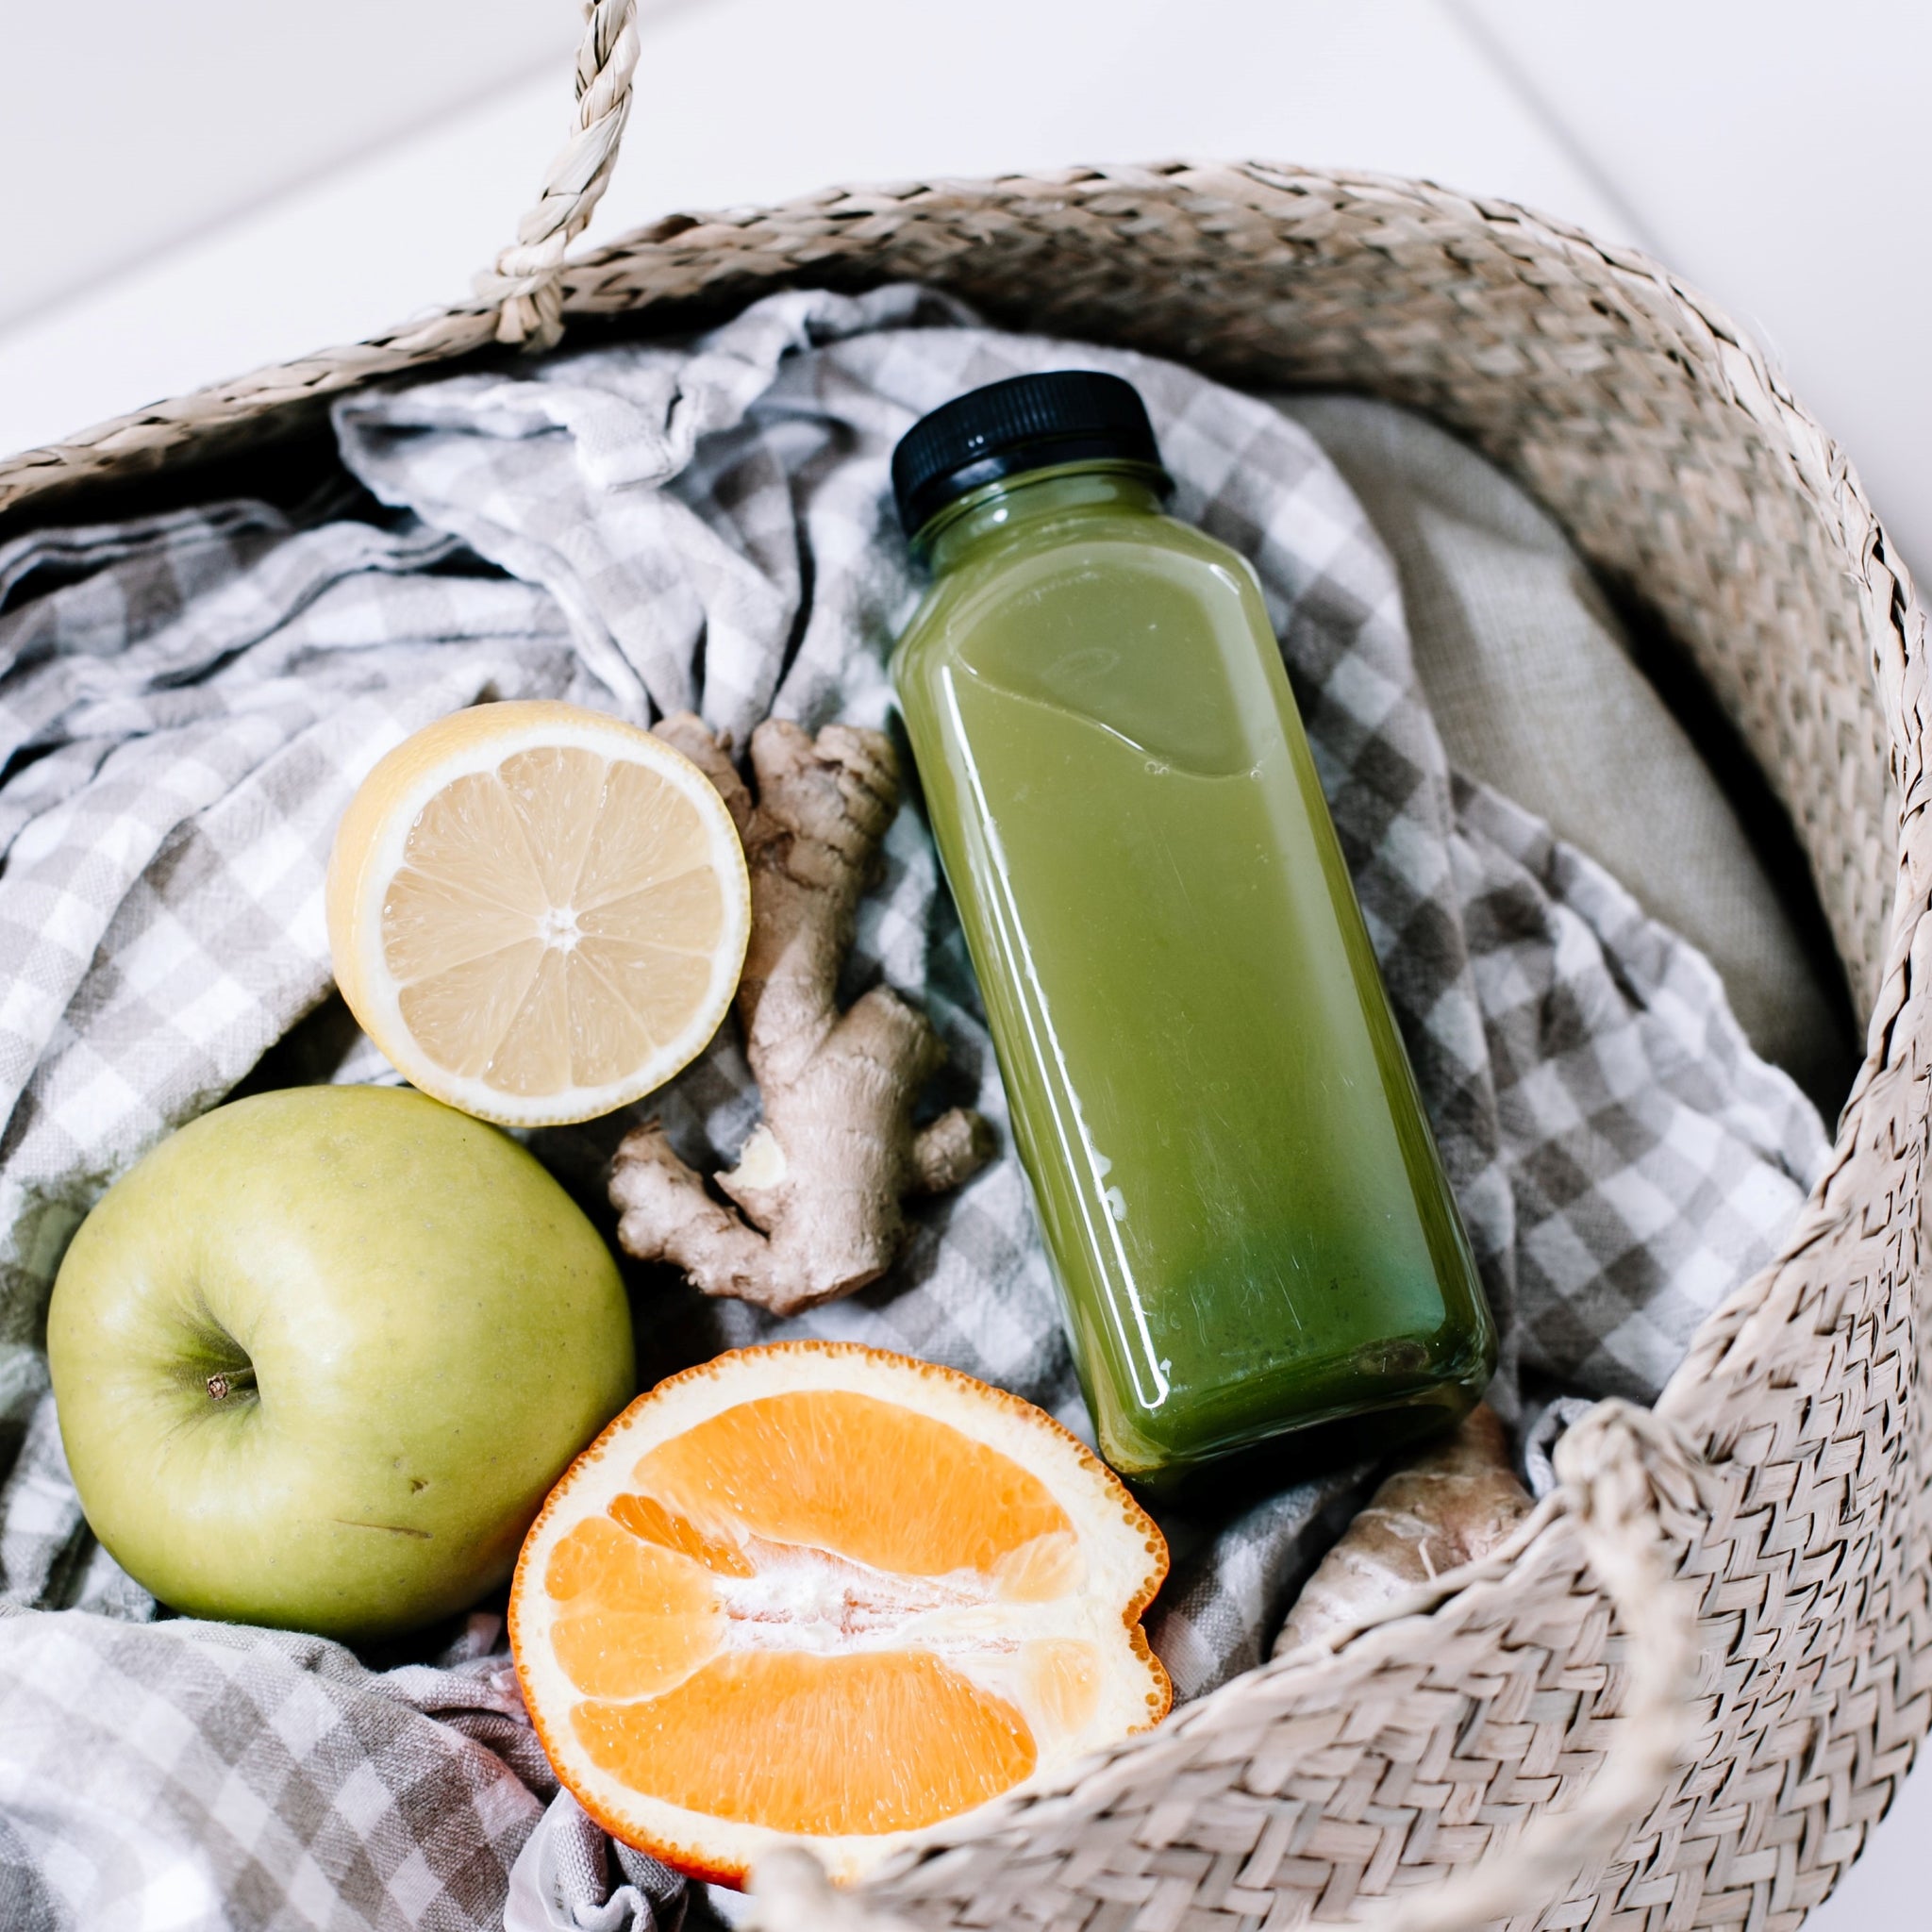 7 Ways to Naturally Detox Your Body